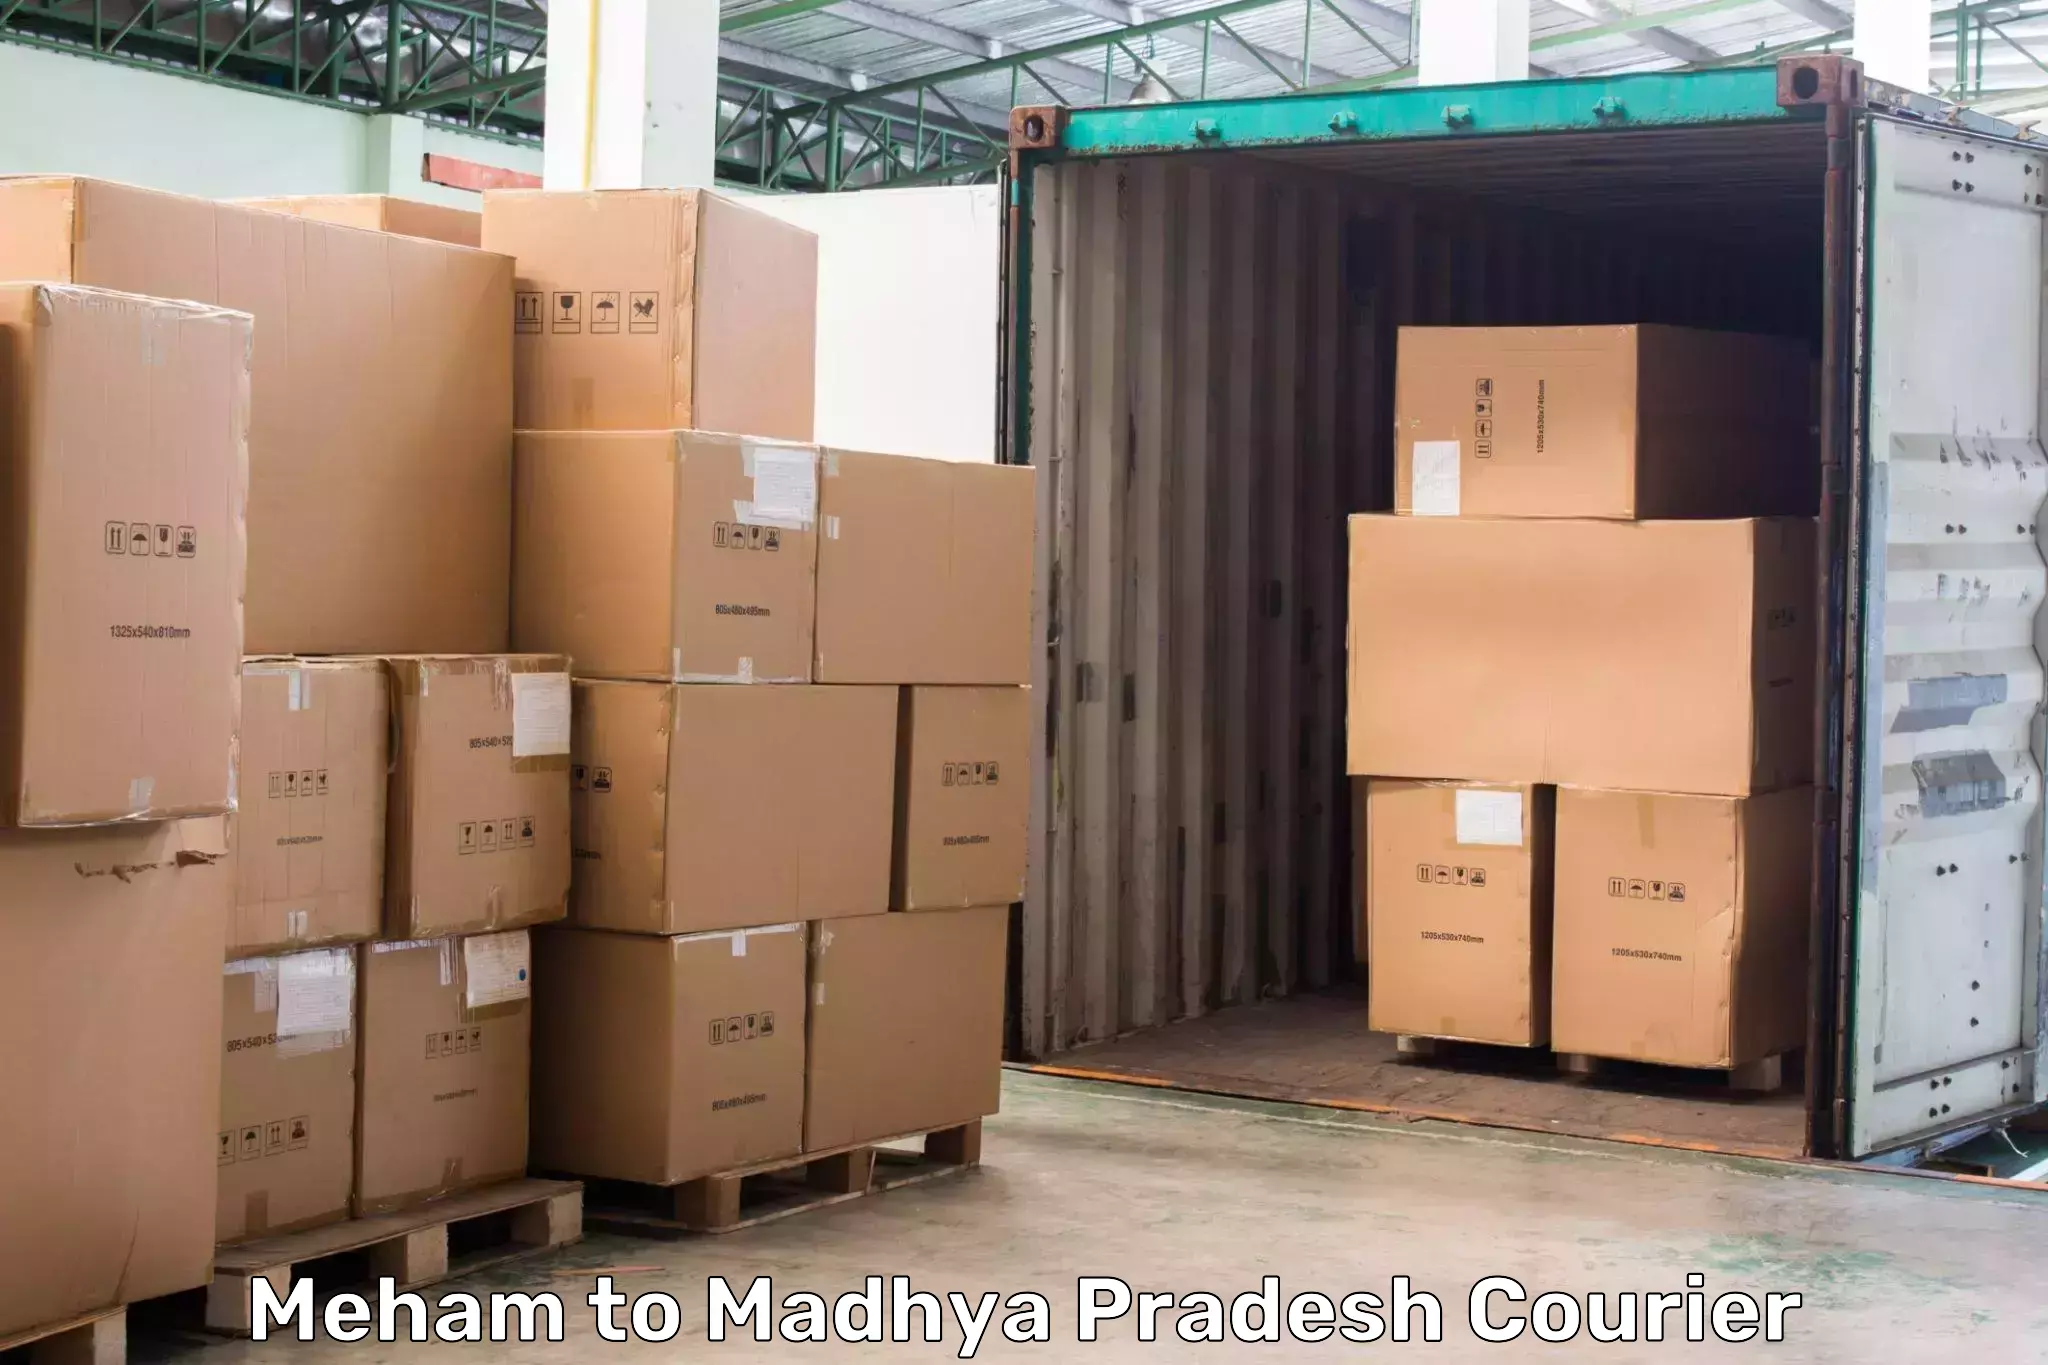 Corporate courier solutions Meham to Raipur Karchuliyan